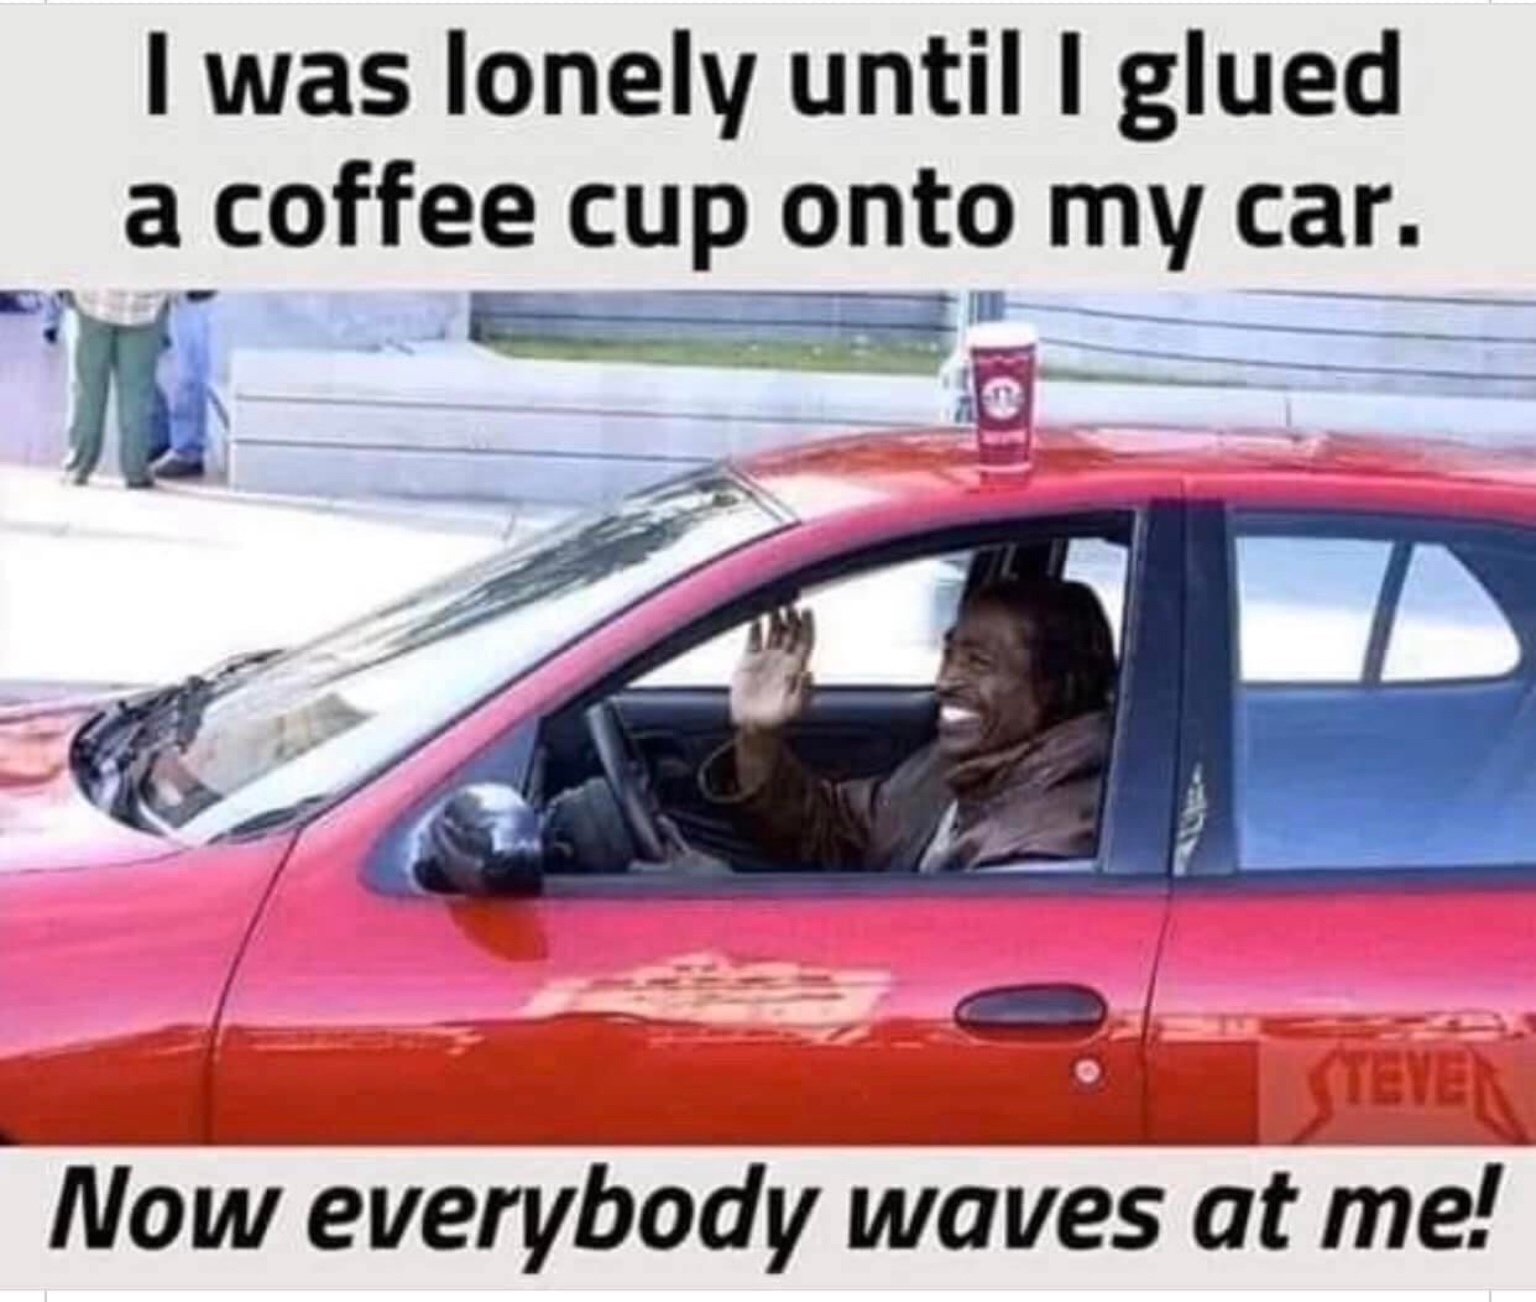 glued coffee cup to car - I was lonely until I glued a coffee cup onto my car. Now everybody waves at me!